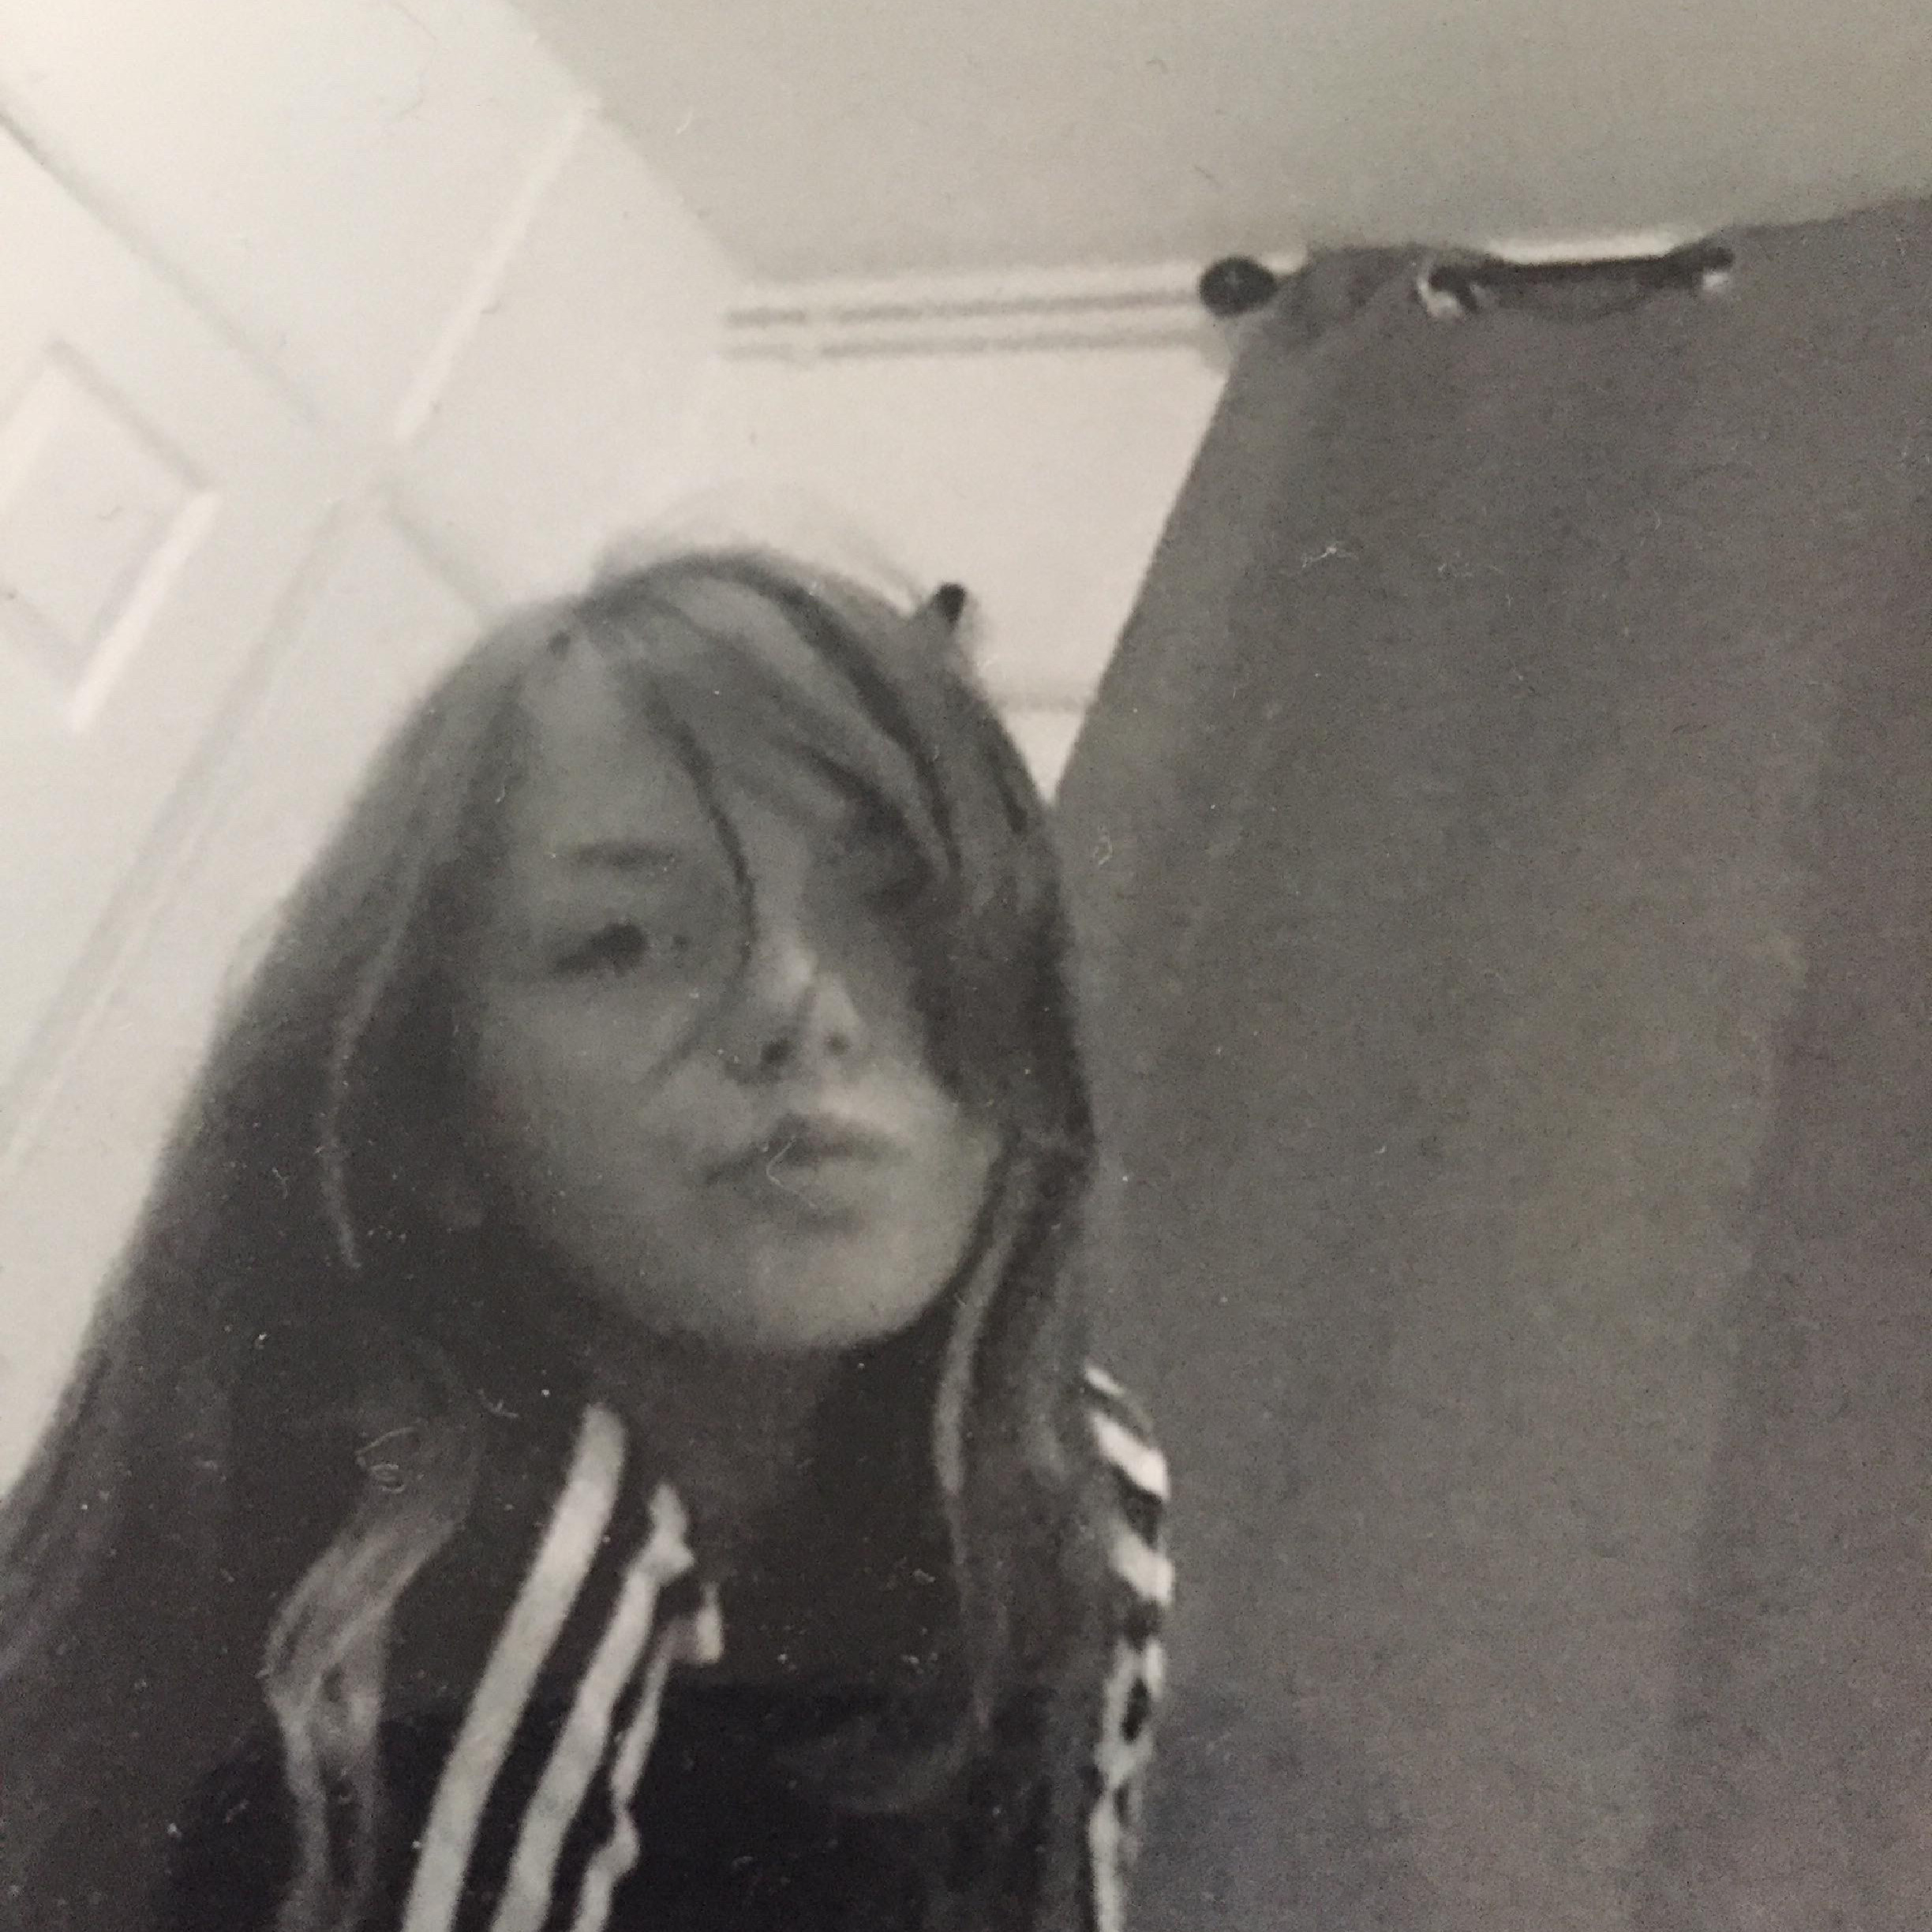 NEWS | West Mercia Police concerned for welfare of missing Hereford teenager